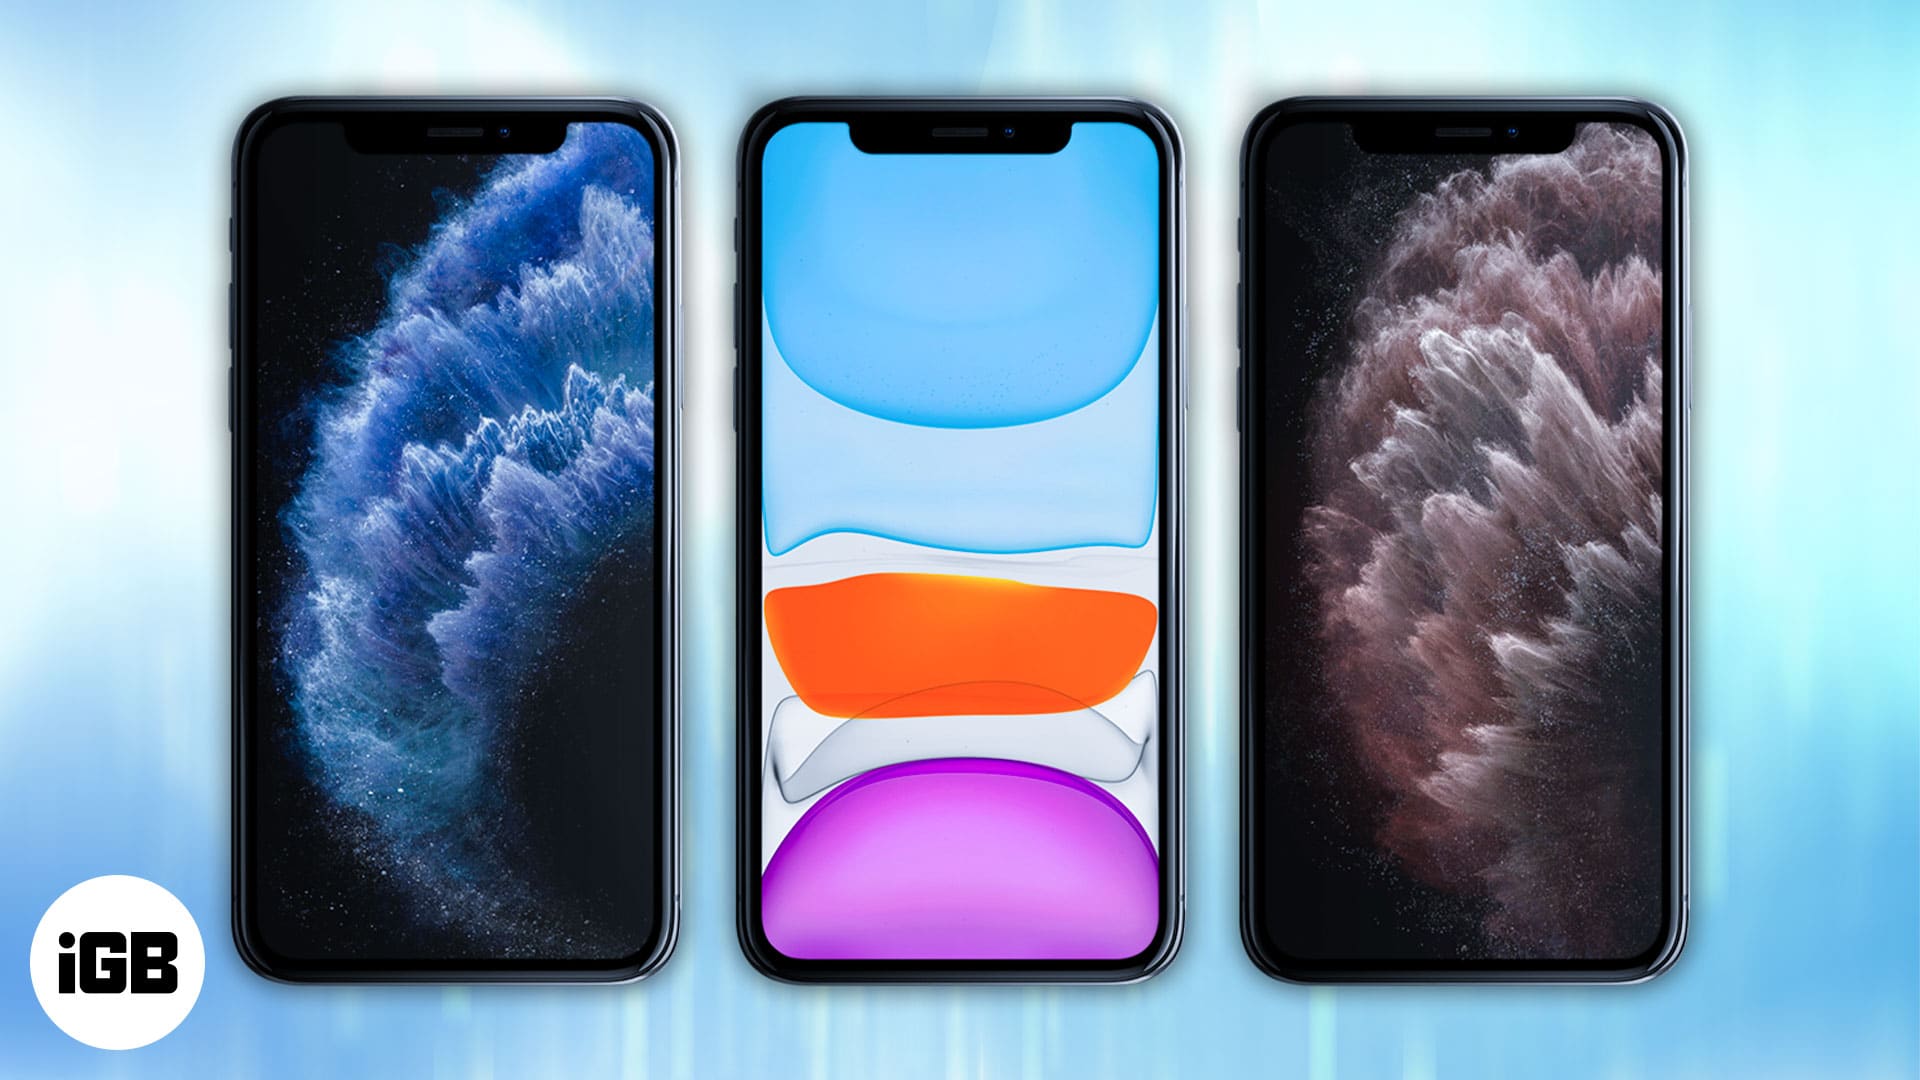 Free IPhone 11 Wallpaper Downloads 100 IPhone 11 Wallpapers for FREE   Wallpaperscom